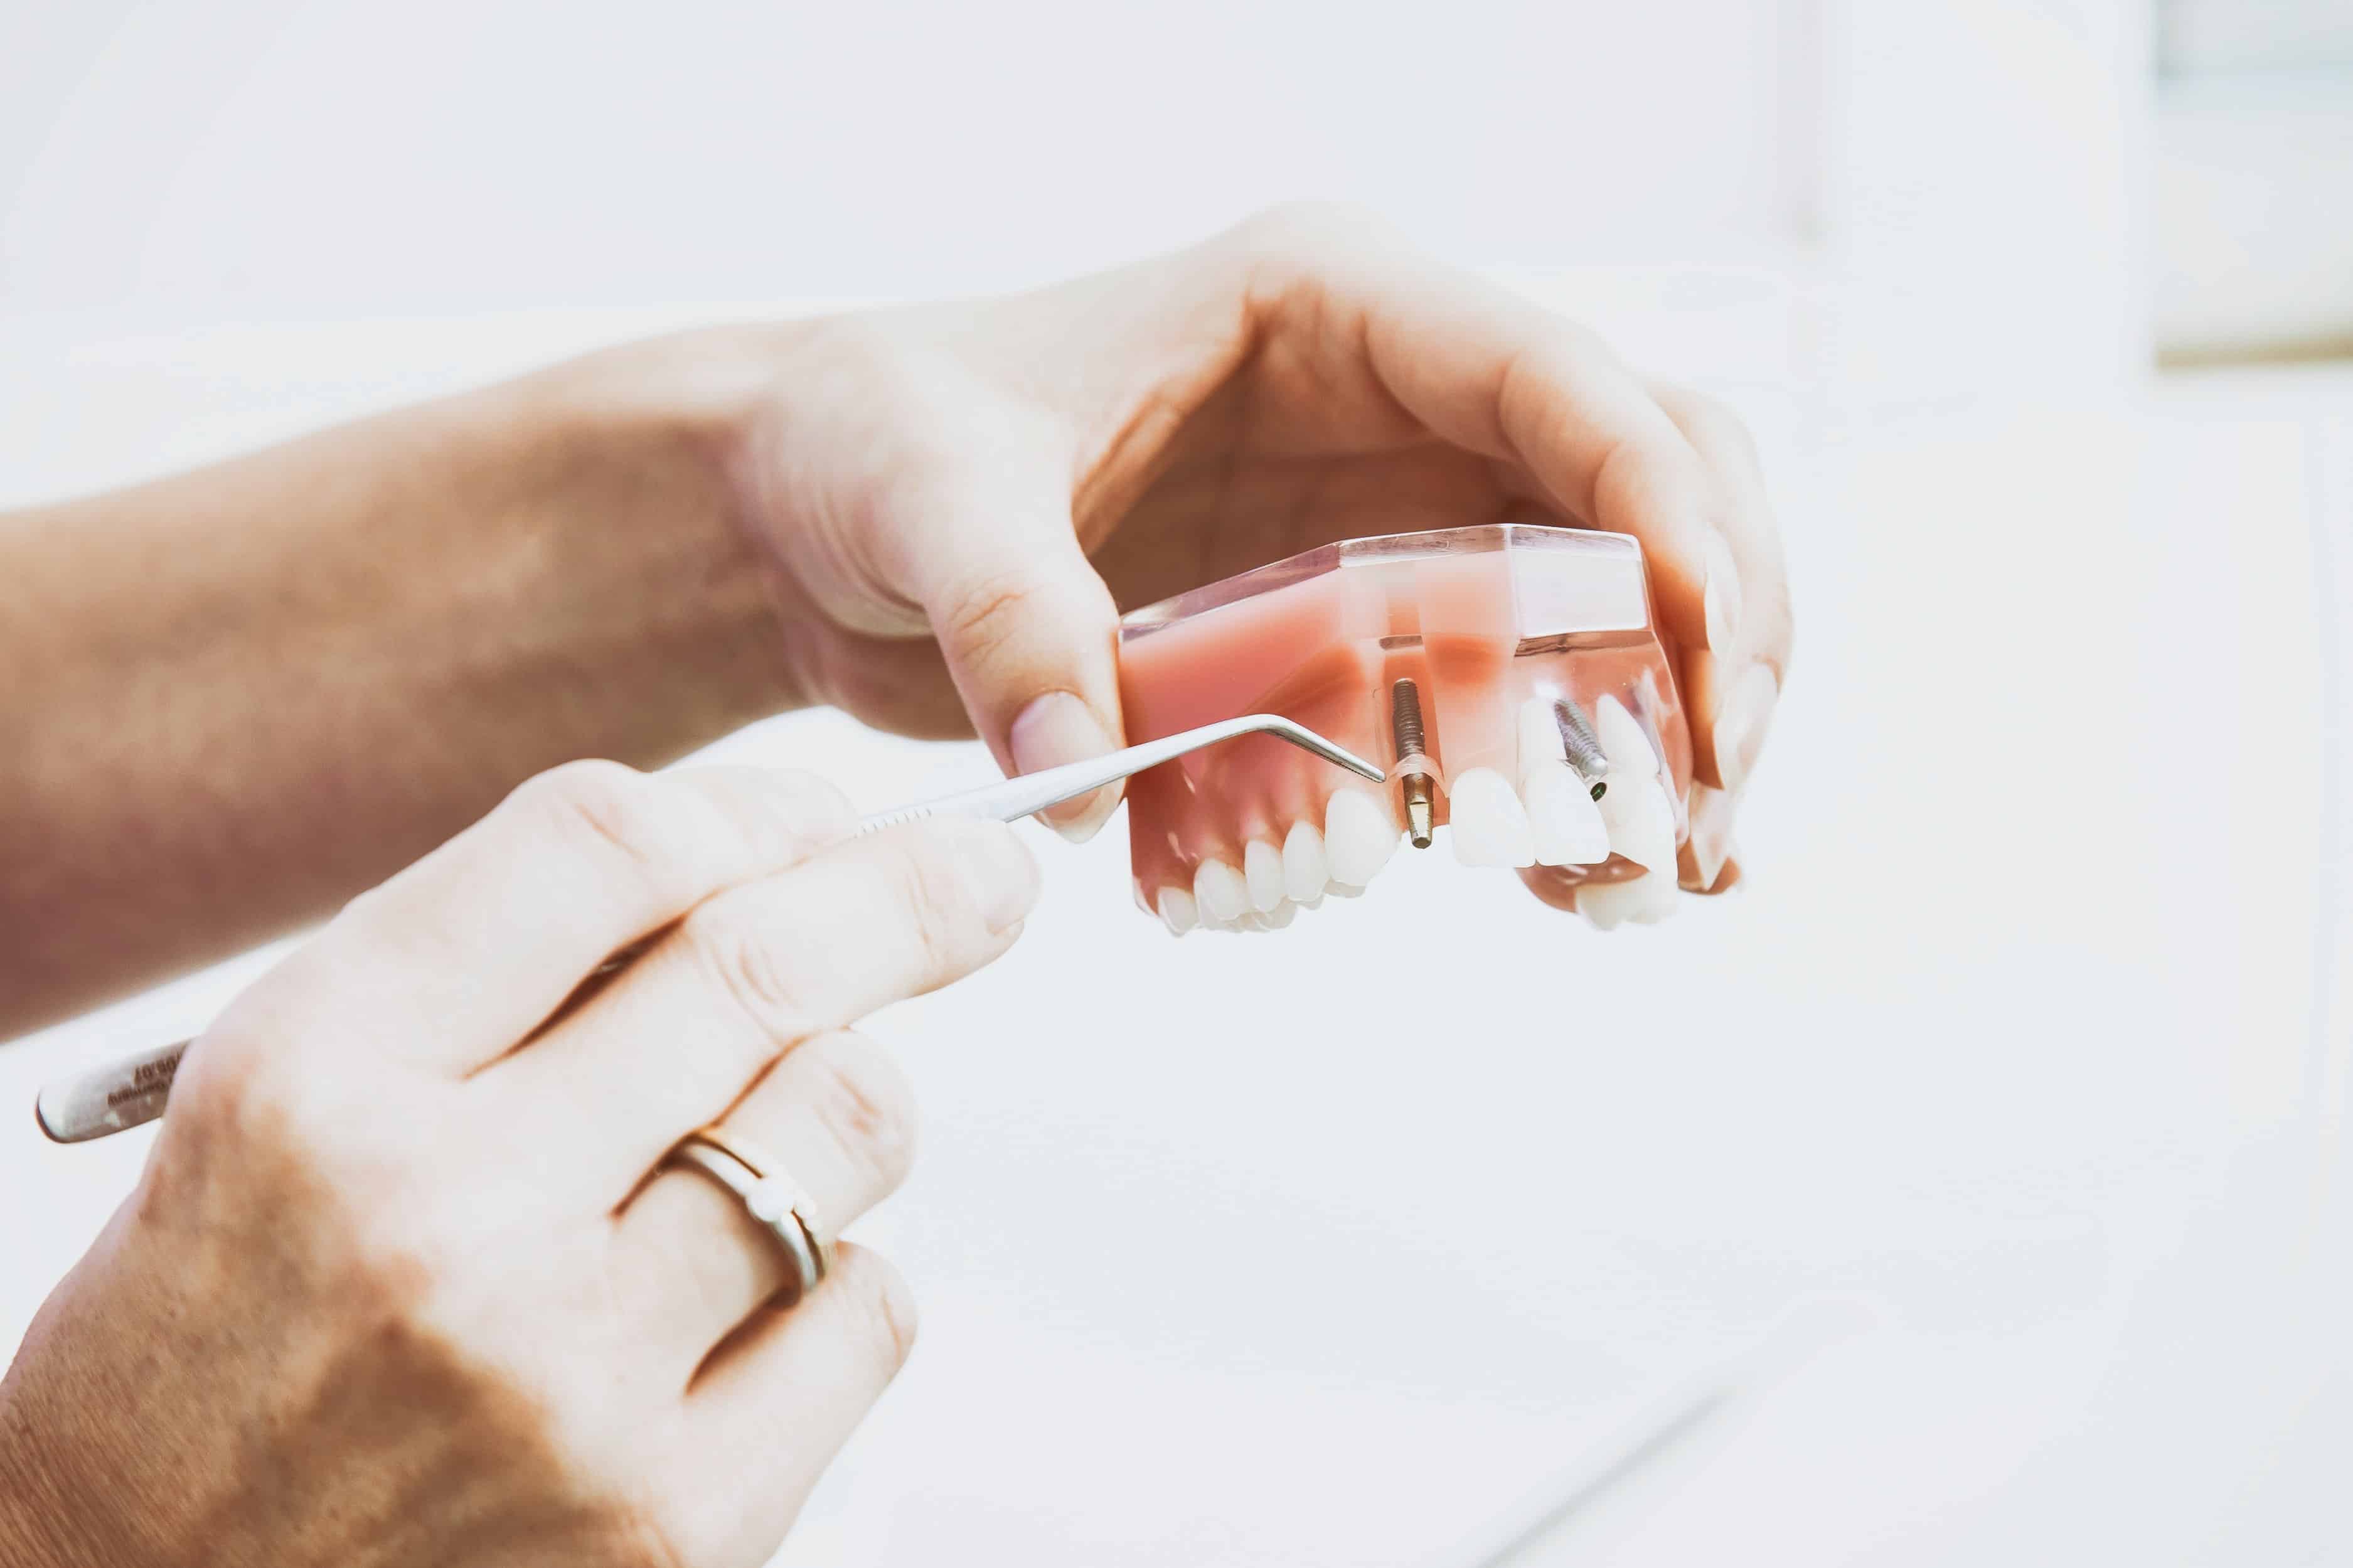 Ultimate Guide to Dental Implants